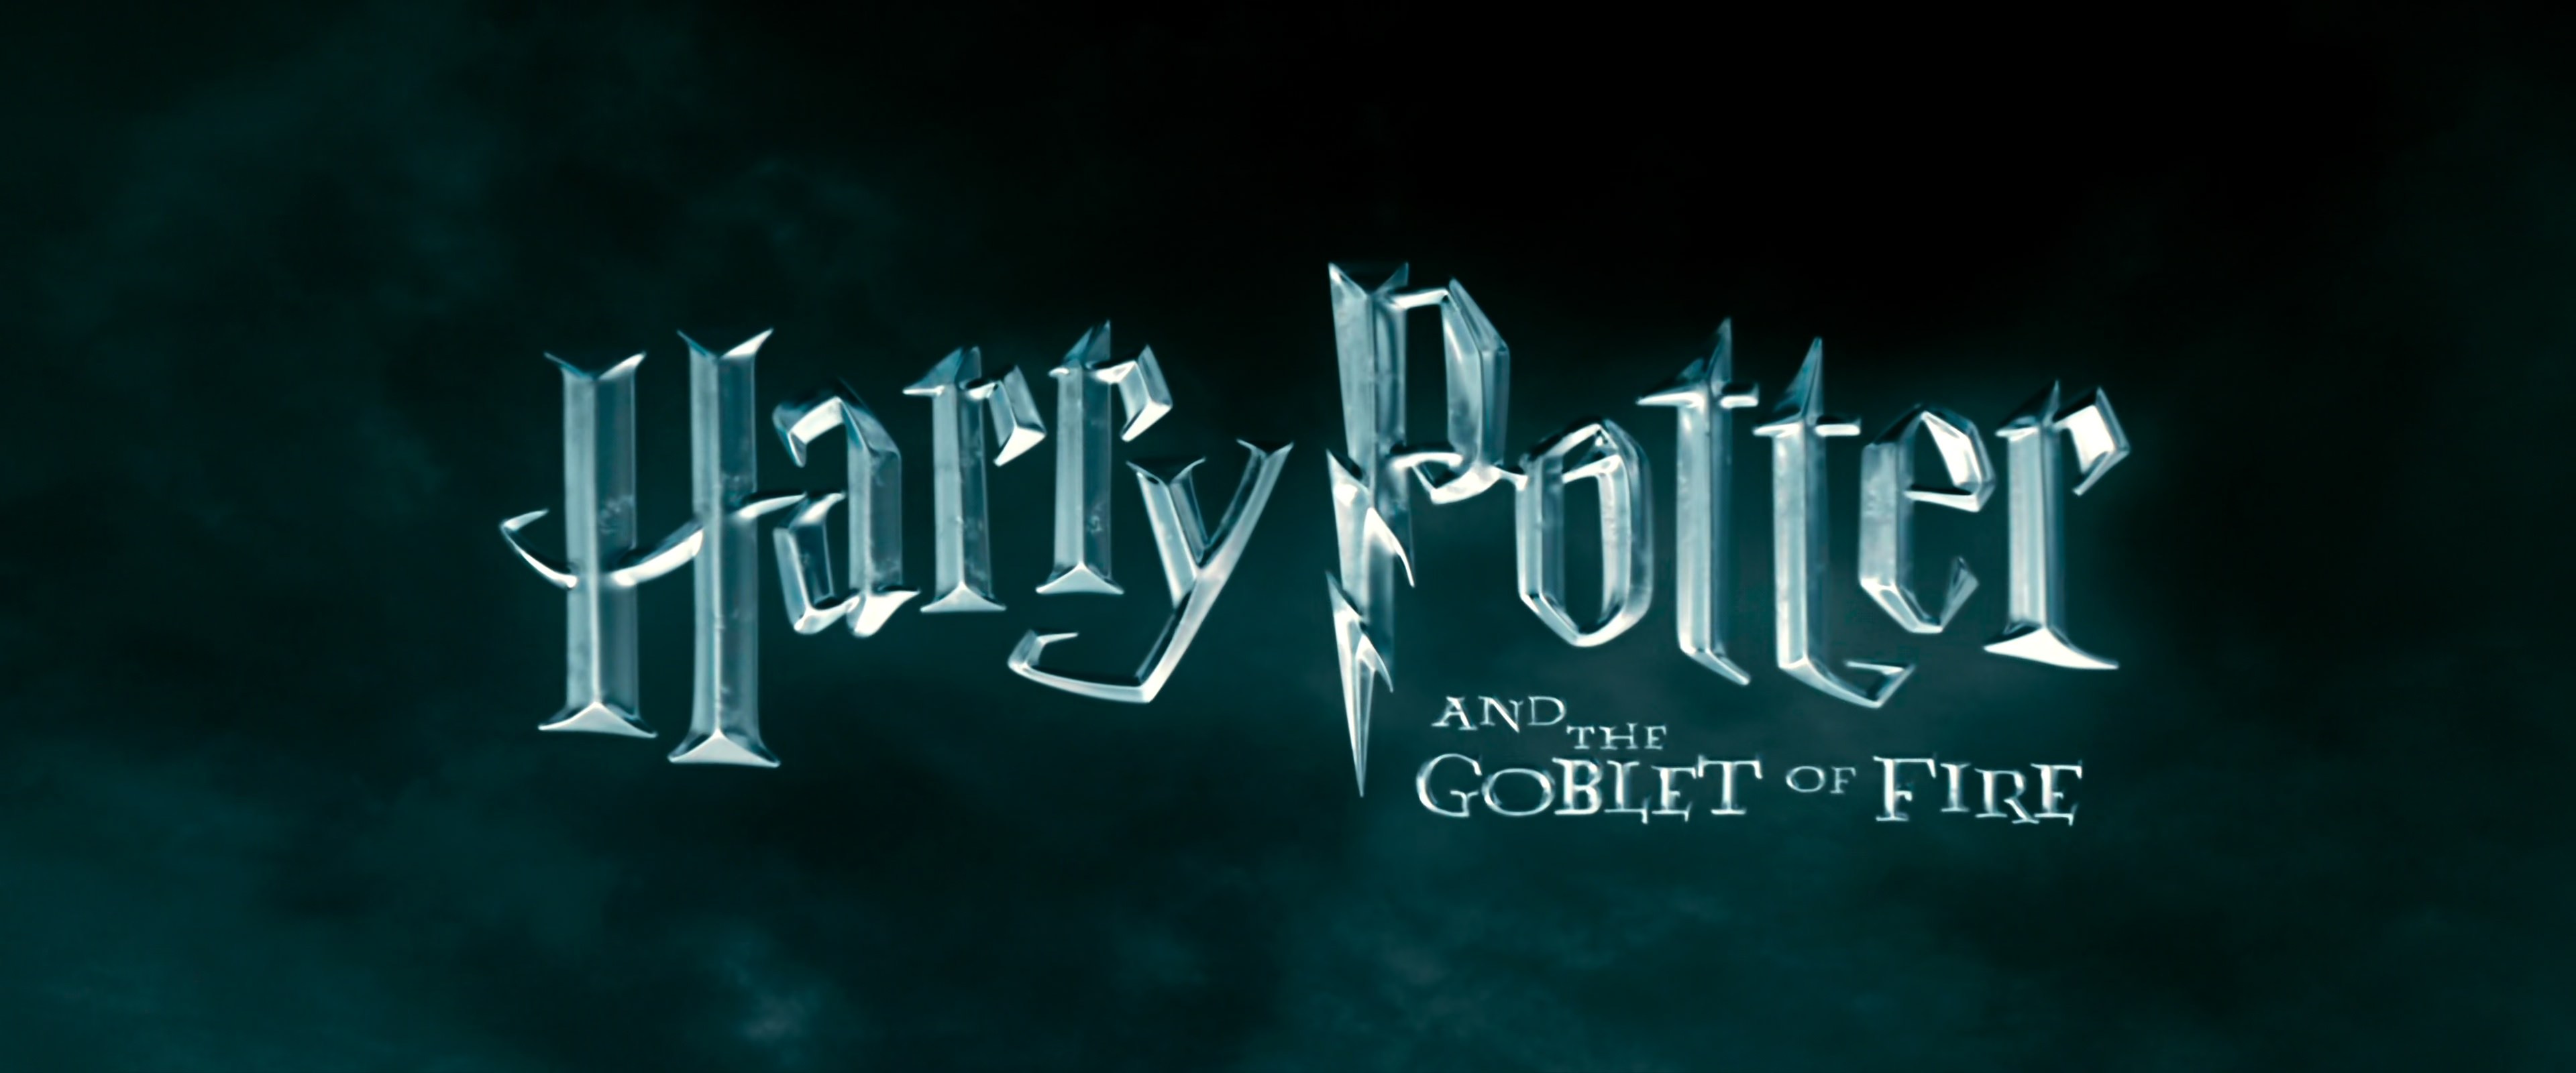 Harry Potter and the Goblet of Fire free downloads